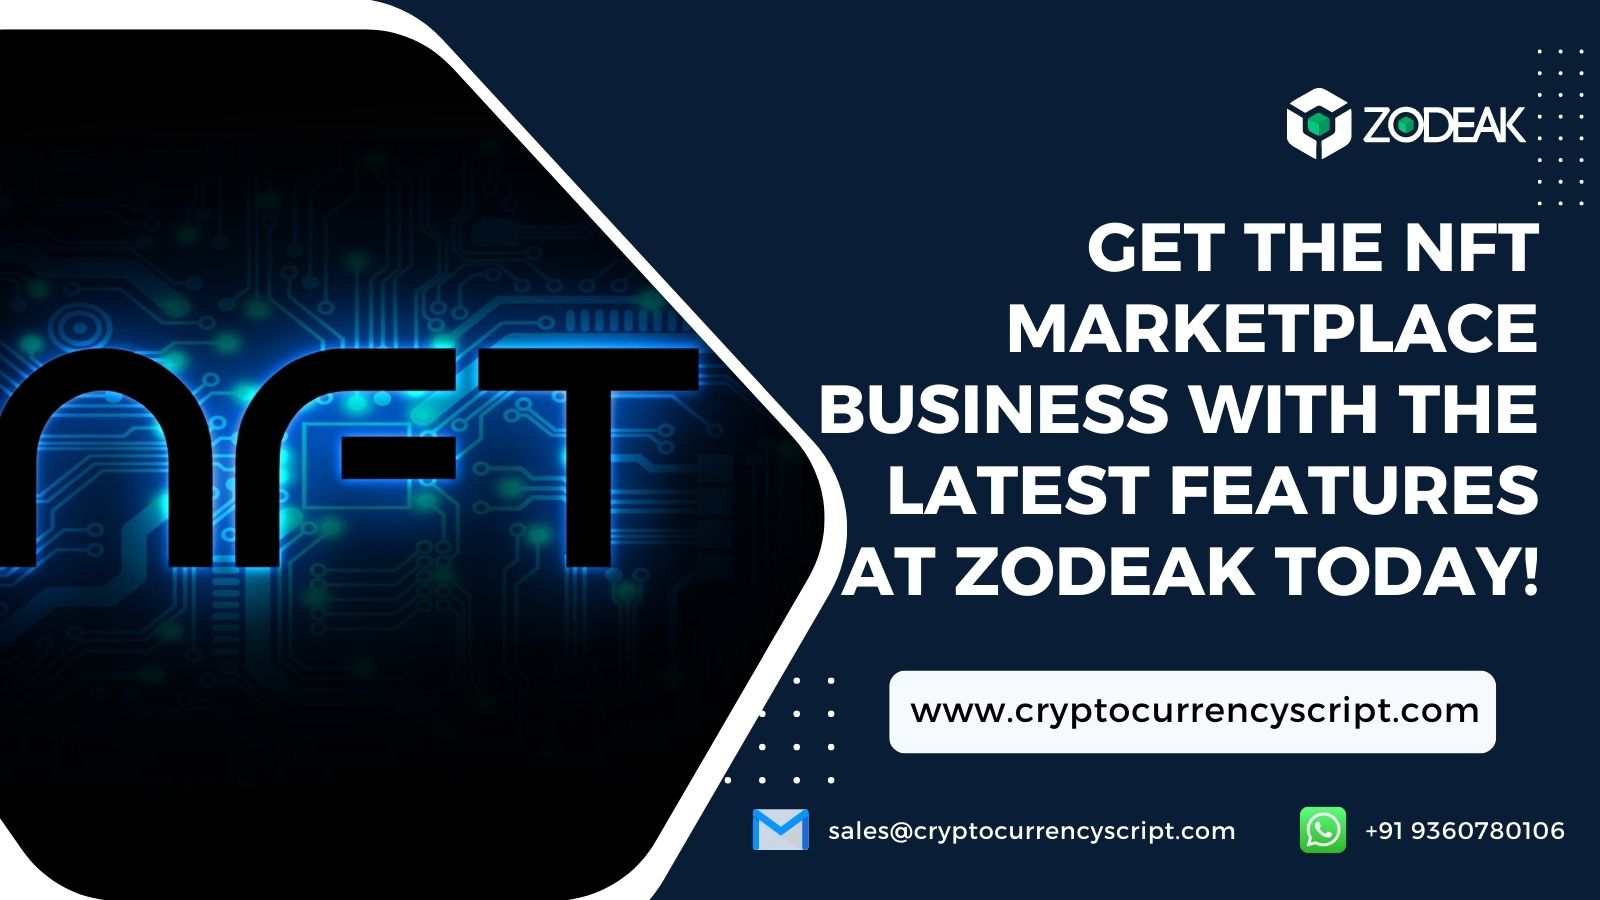 Get The NFT Marketplace Business With The Latest Features At Zodeak Today!